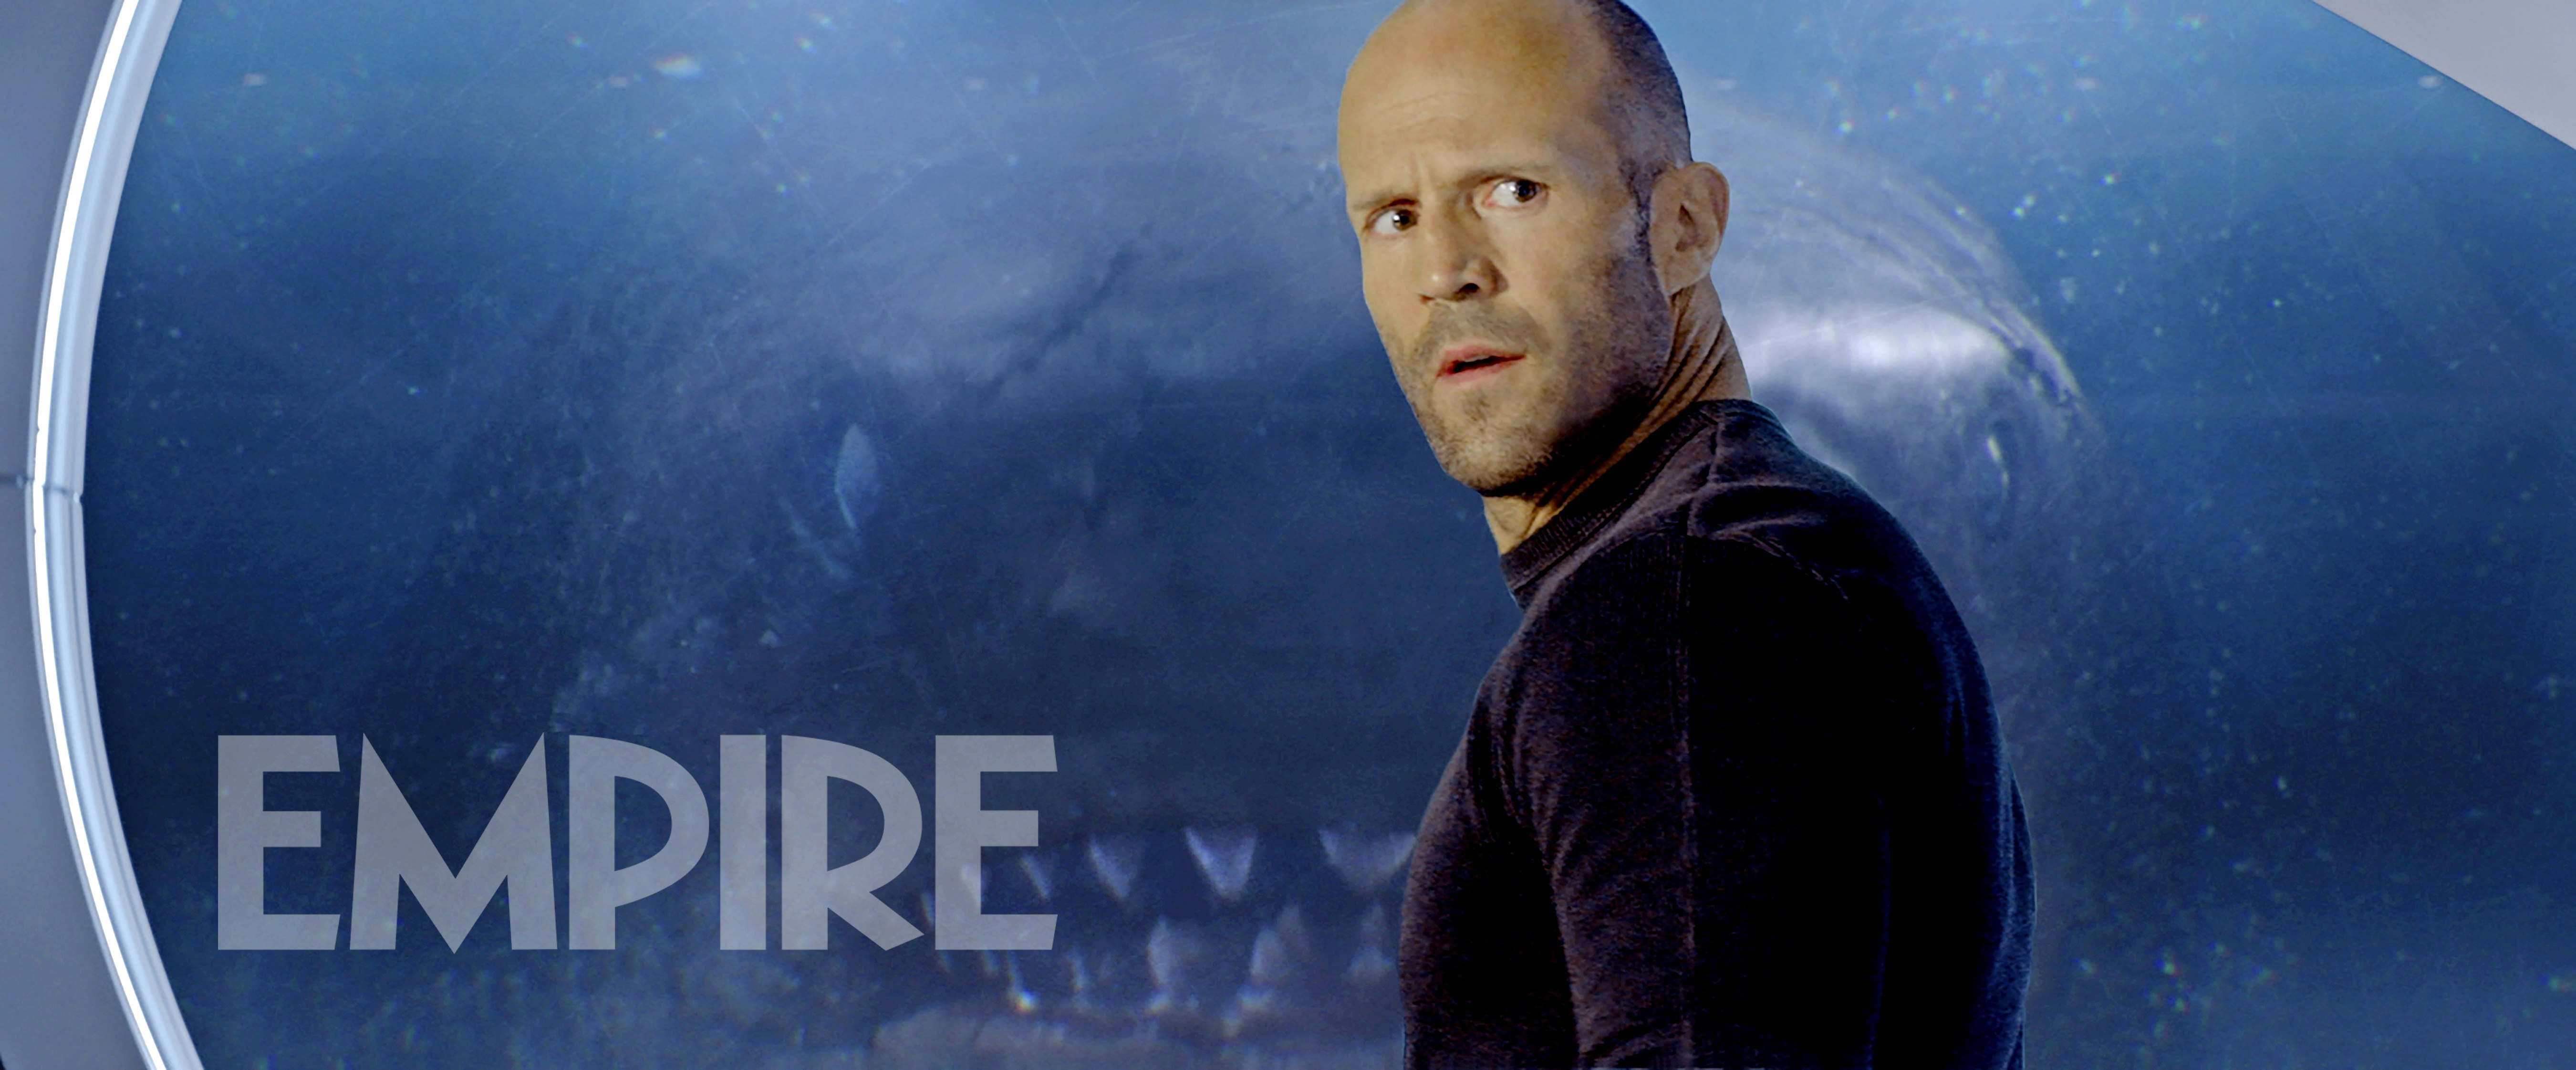 Jason Statham Stars In Exclusive Image From The Meg | Movies |  %%channel_name%%